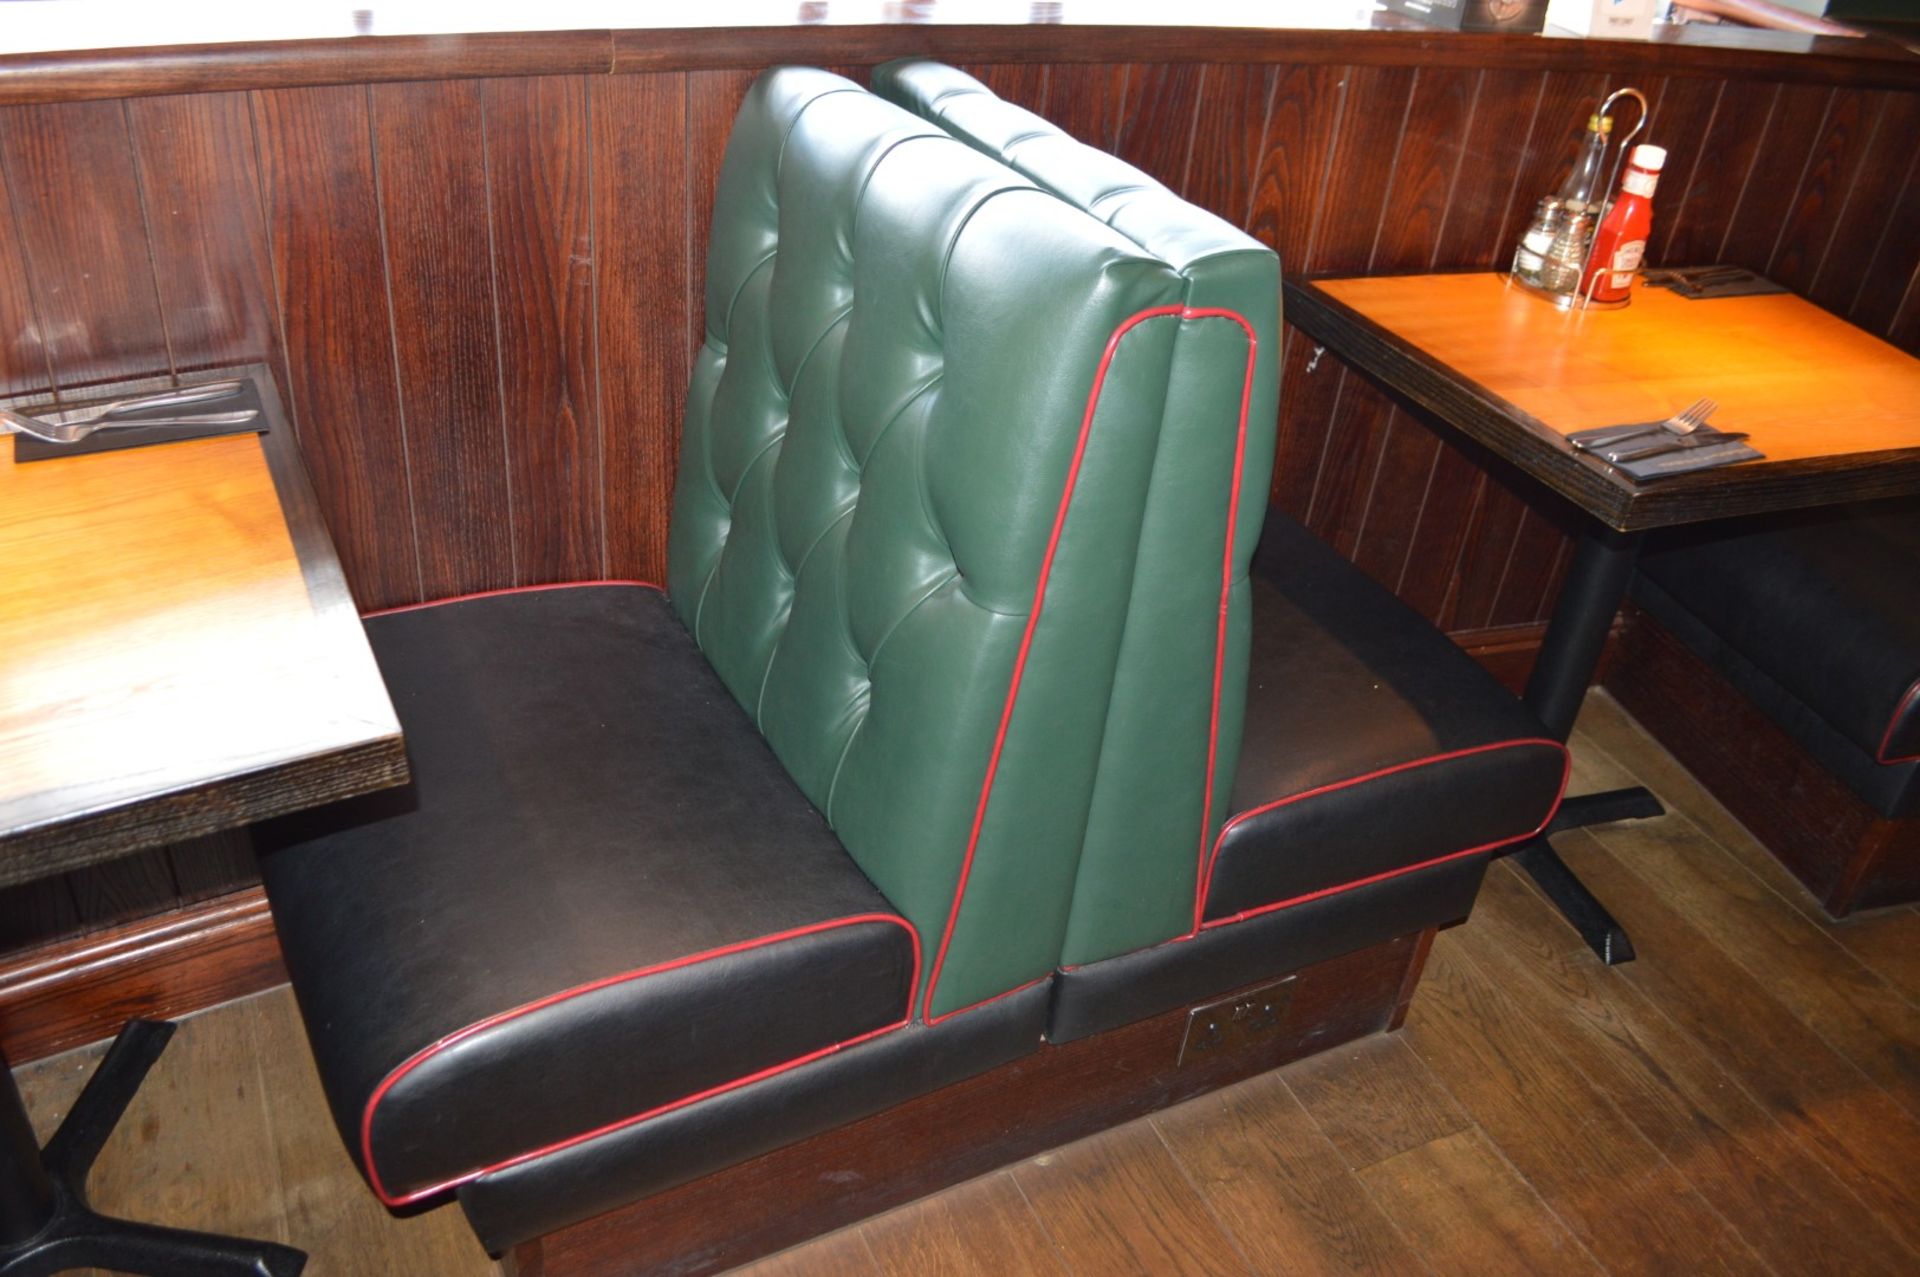 6 x Sections of Restaurant Booth Seating - Include 2 x Single Seats and 4 x Single Back to Back Seat - Image 5 of 12